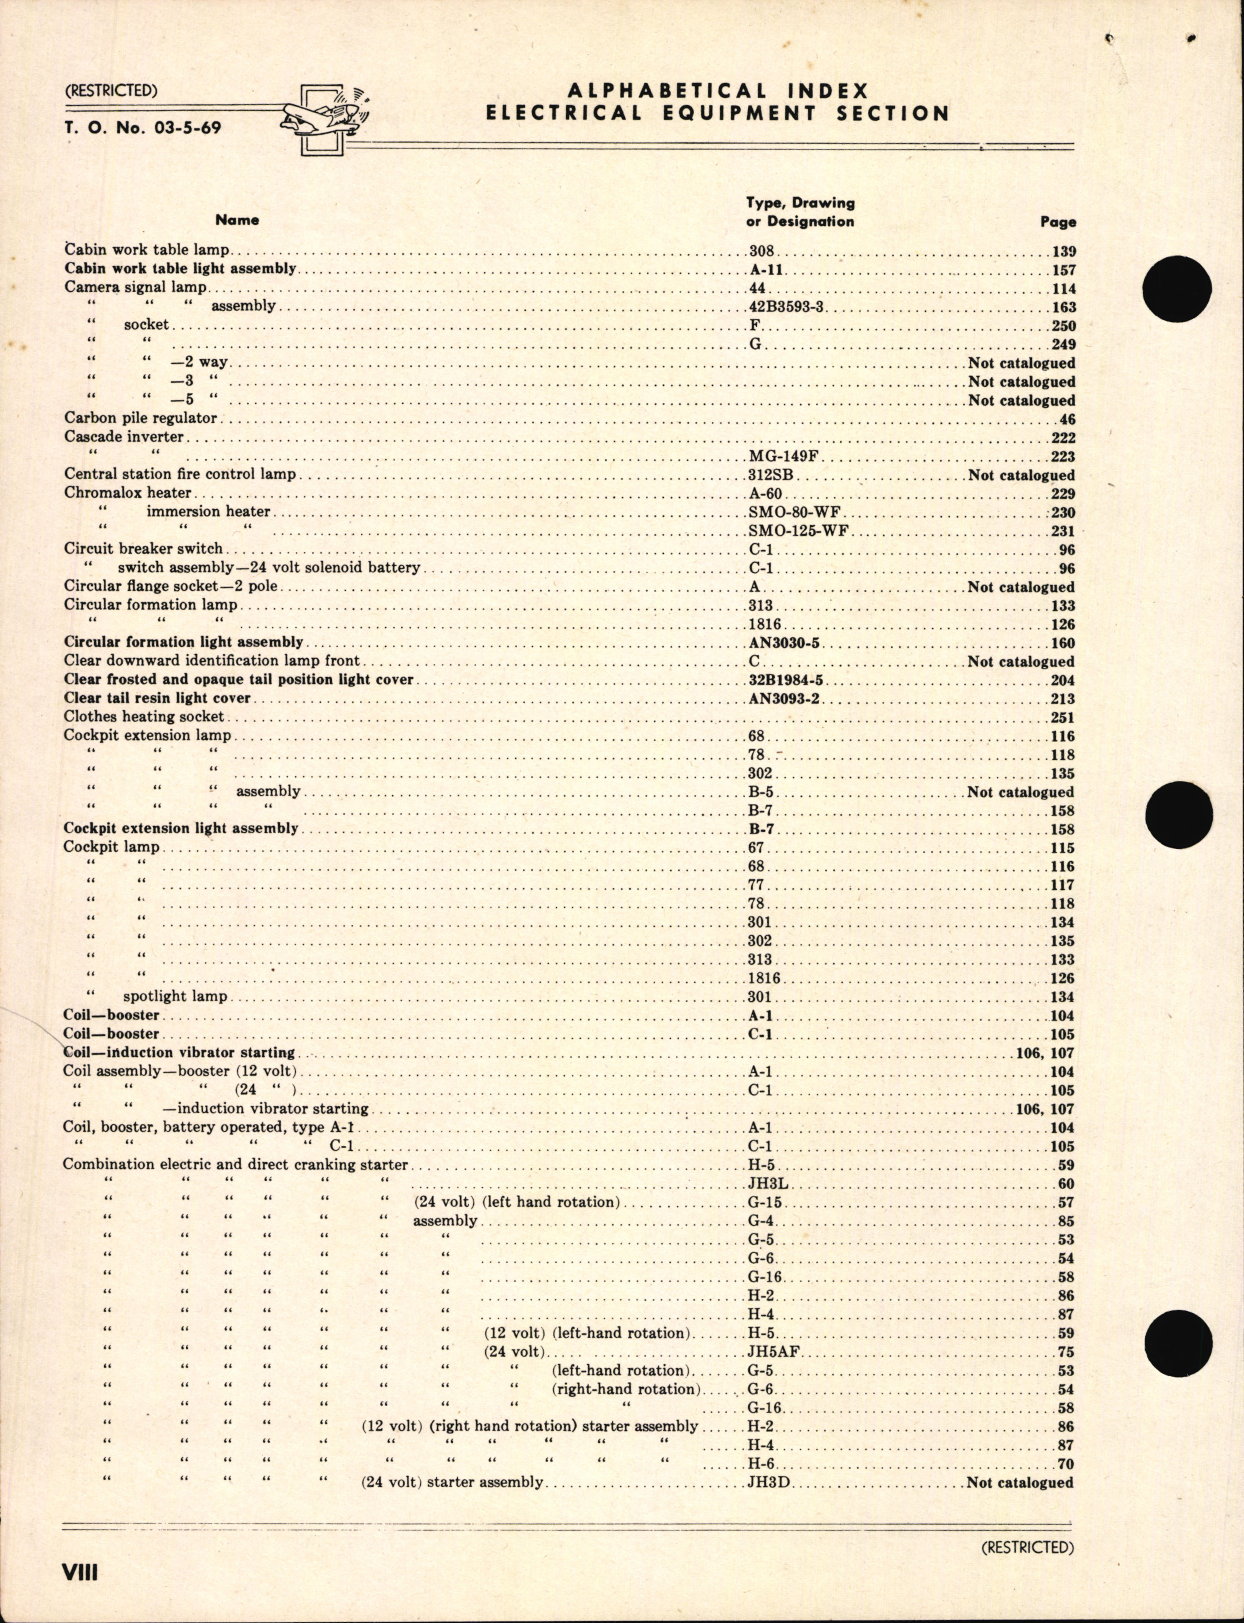 Sample page 8 from AirCorps Library document: Index of Army-Navy Aeronautical Equipment - Electrical